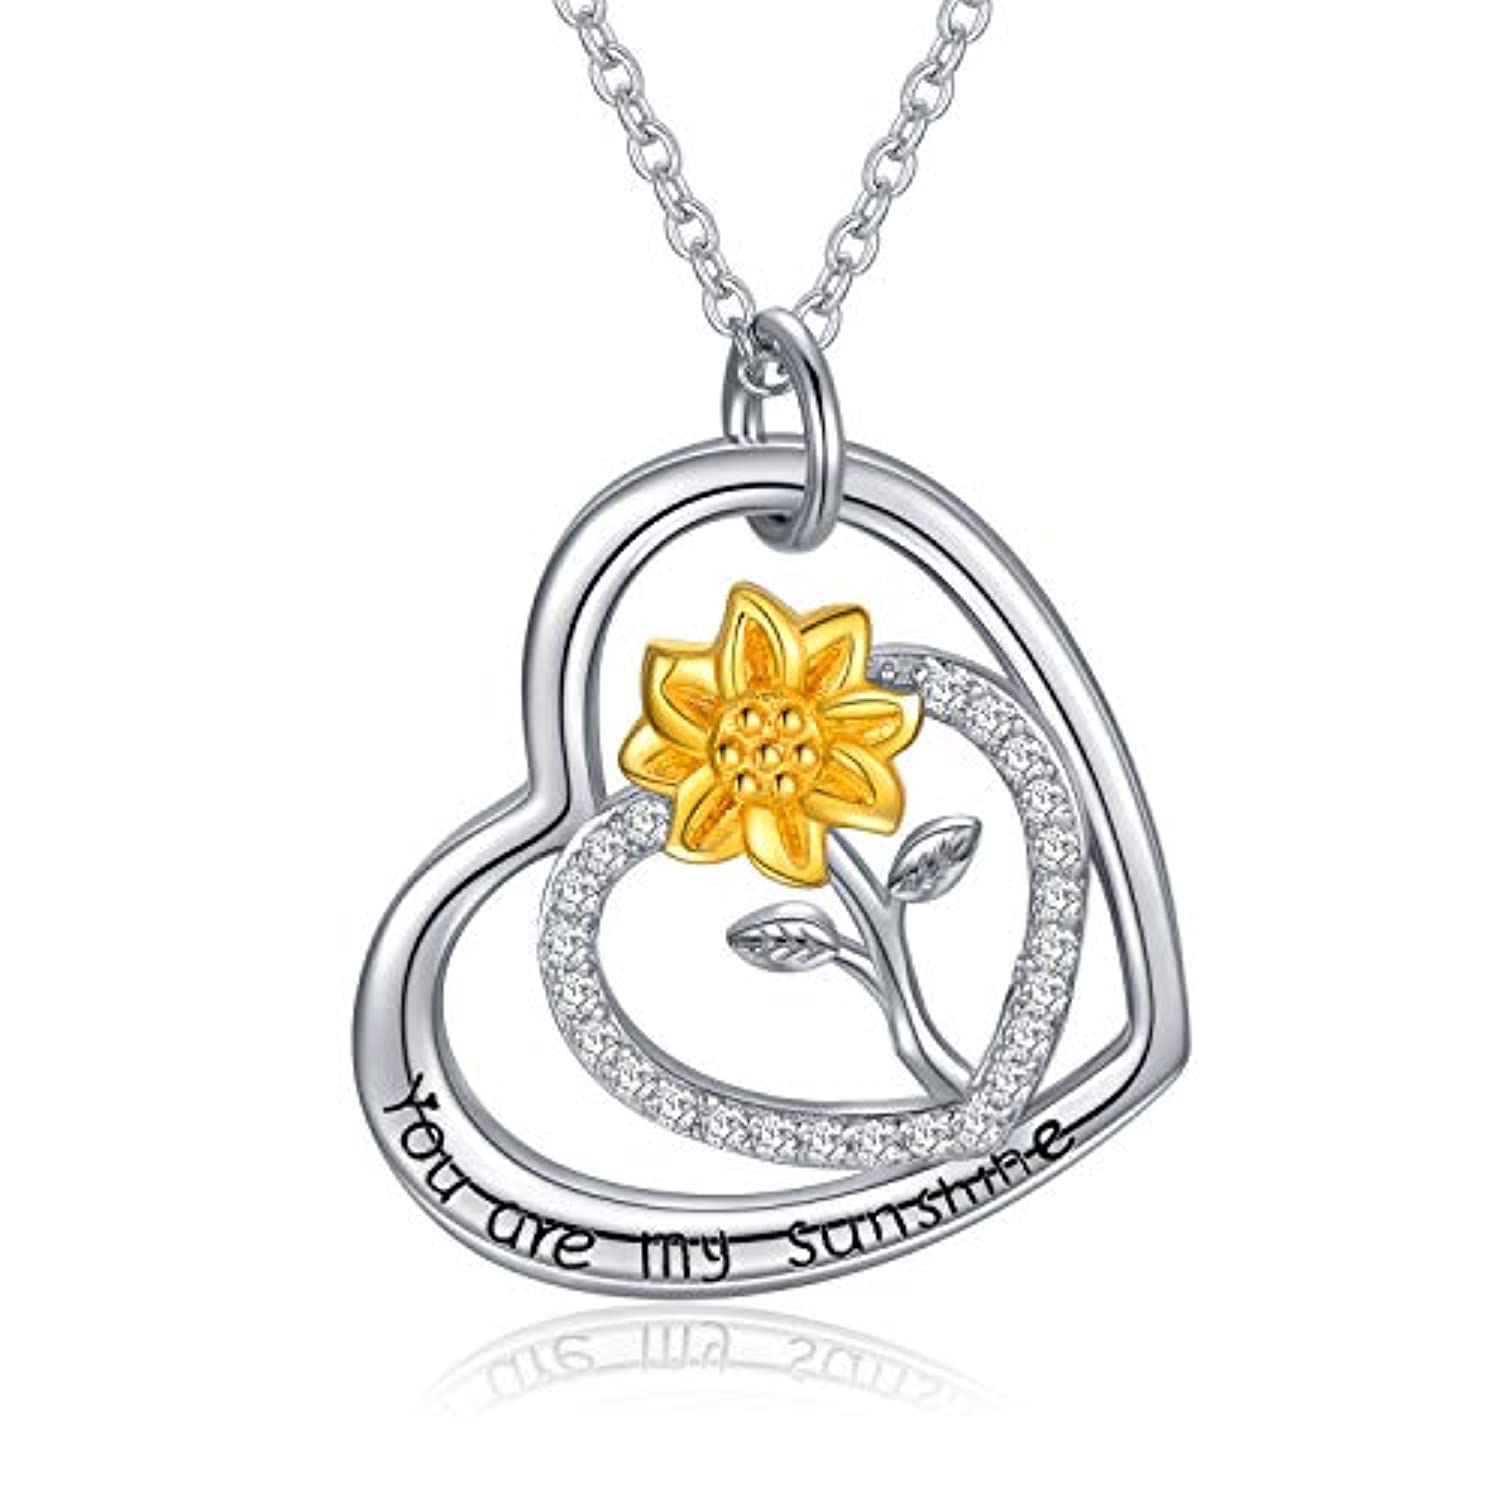 Set of 2 Sunflower Necklaces You Are My Sunshine Friendship Necklace with  Sunflower Pendant in Silver and Gold-Plated Stainless Steel Chain for Women  and Girls, Stainless Steel Copper : Amazon.de: Fashion